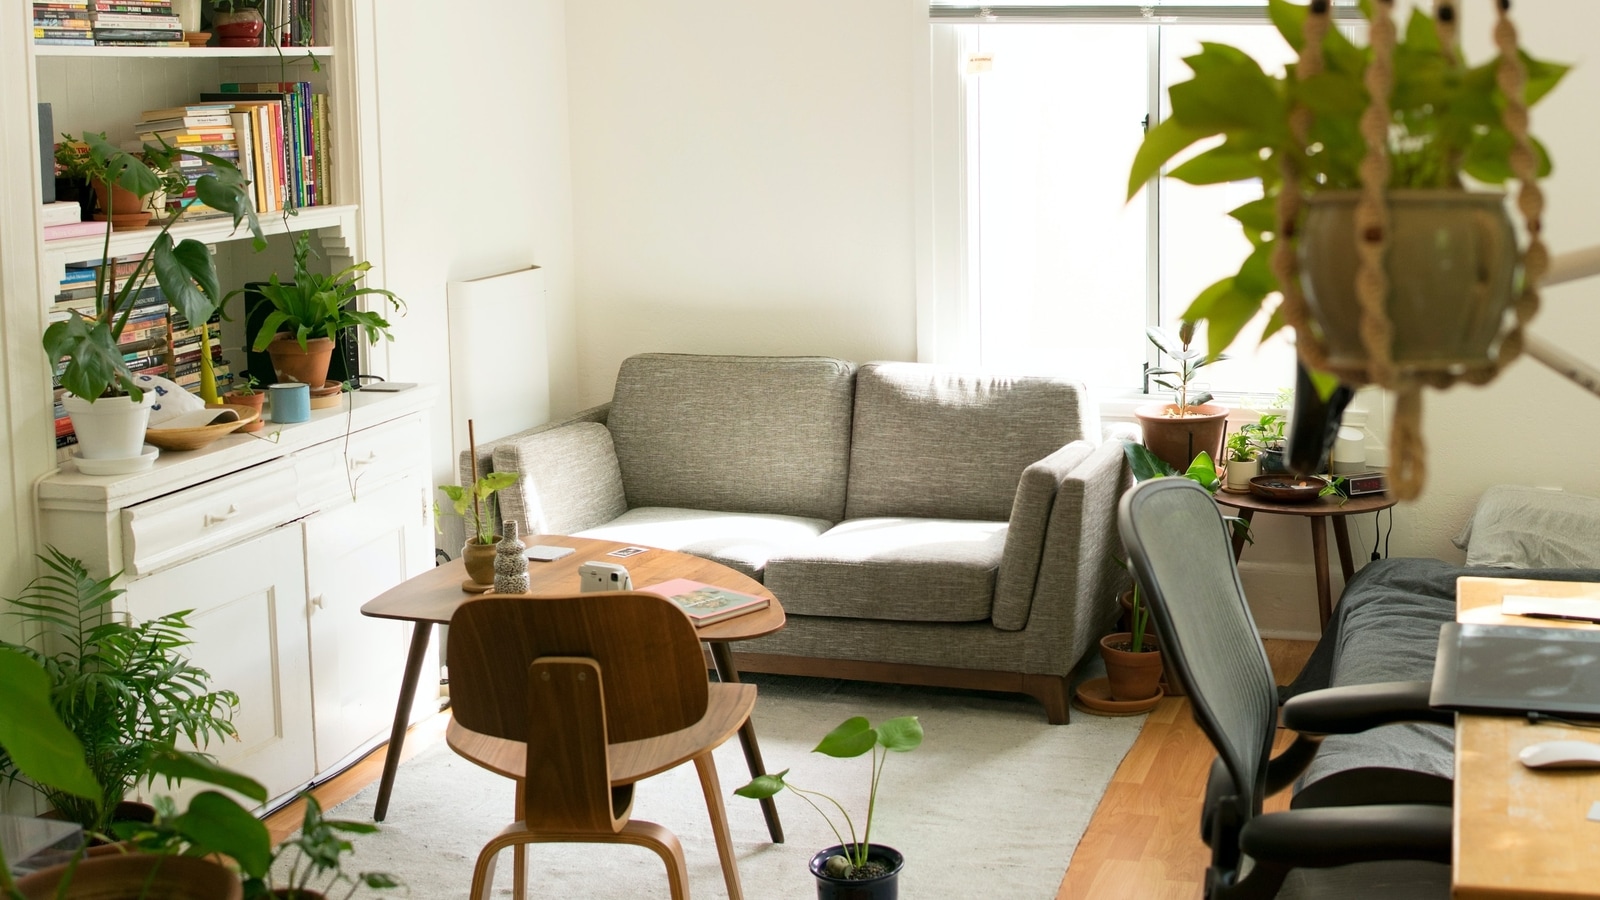 Jesmonite Is The Sustainable Home Decor Trend You Need To Try Now. Here's  How To Pull It Off